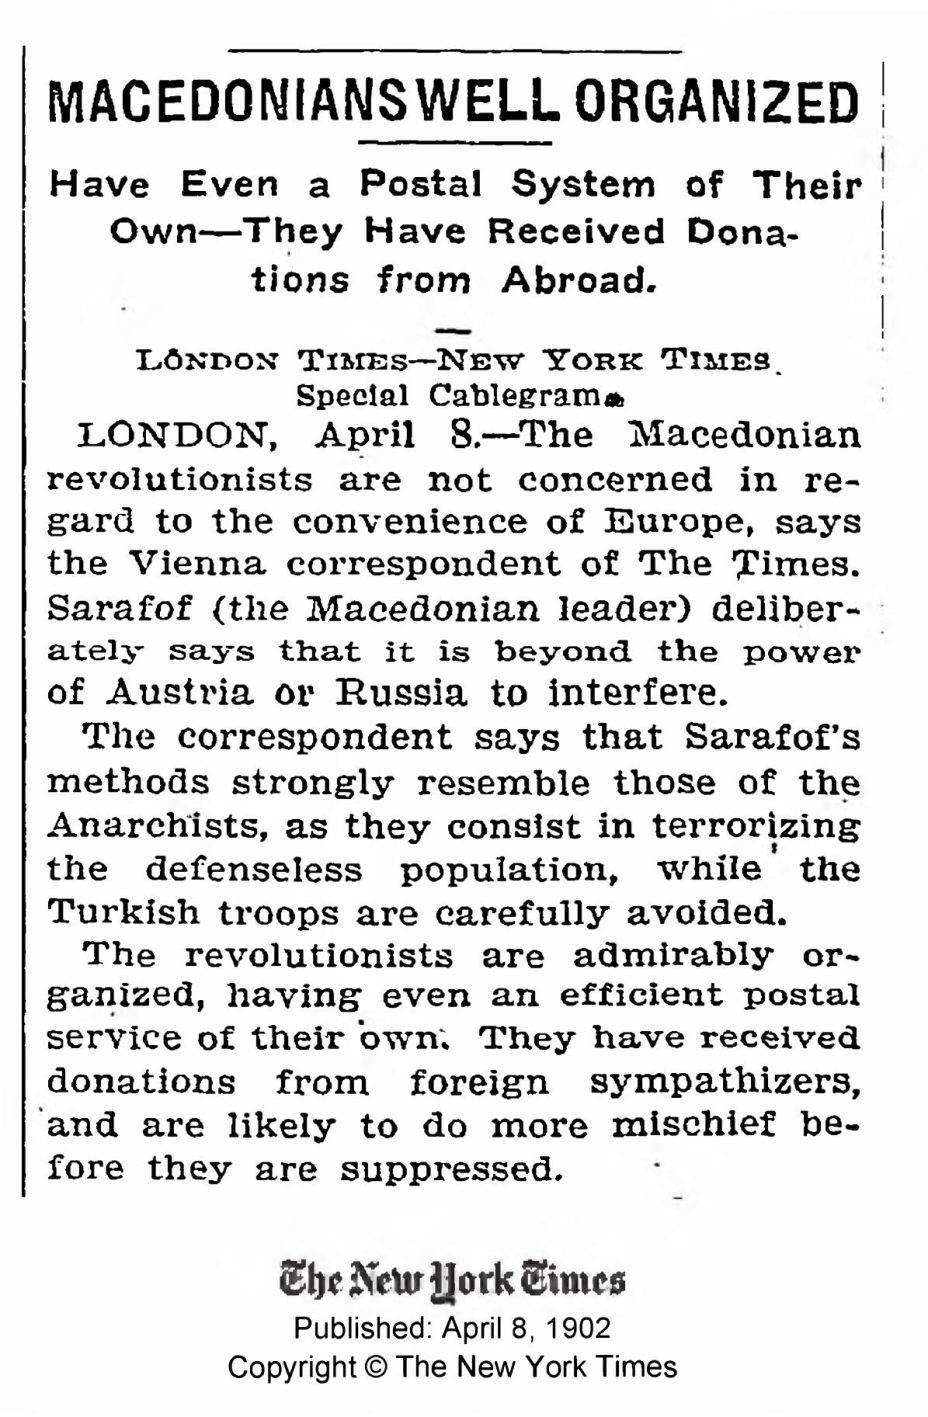 1902.04.08_The New York Times - Macedonians Well Organized